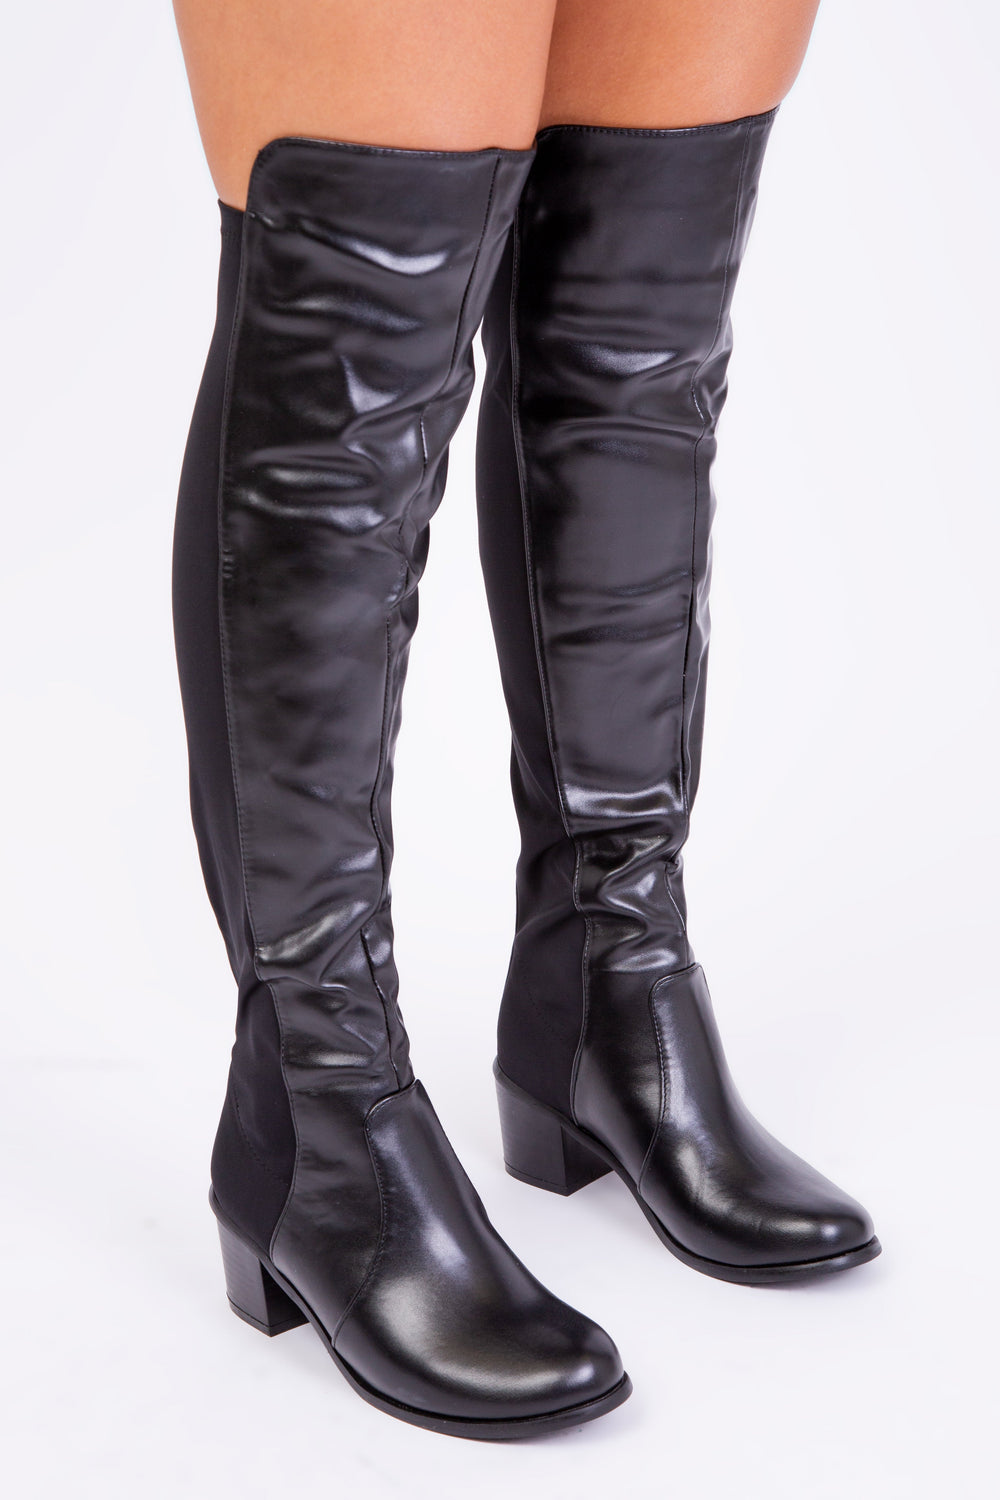 BRITTA THIGH HIGH MID HEELED BOOTS IN BLACK FAUX LEATHER